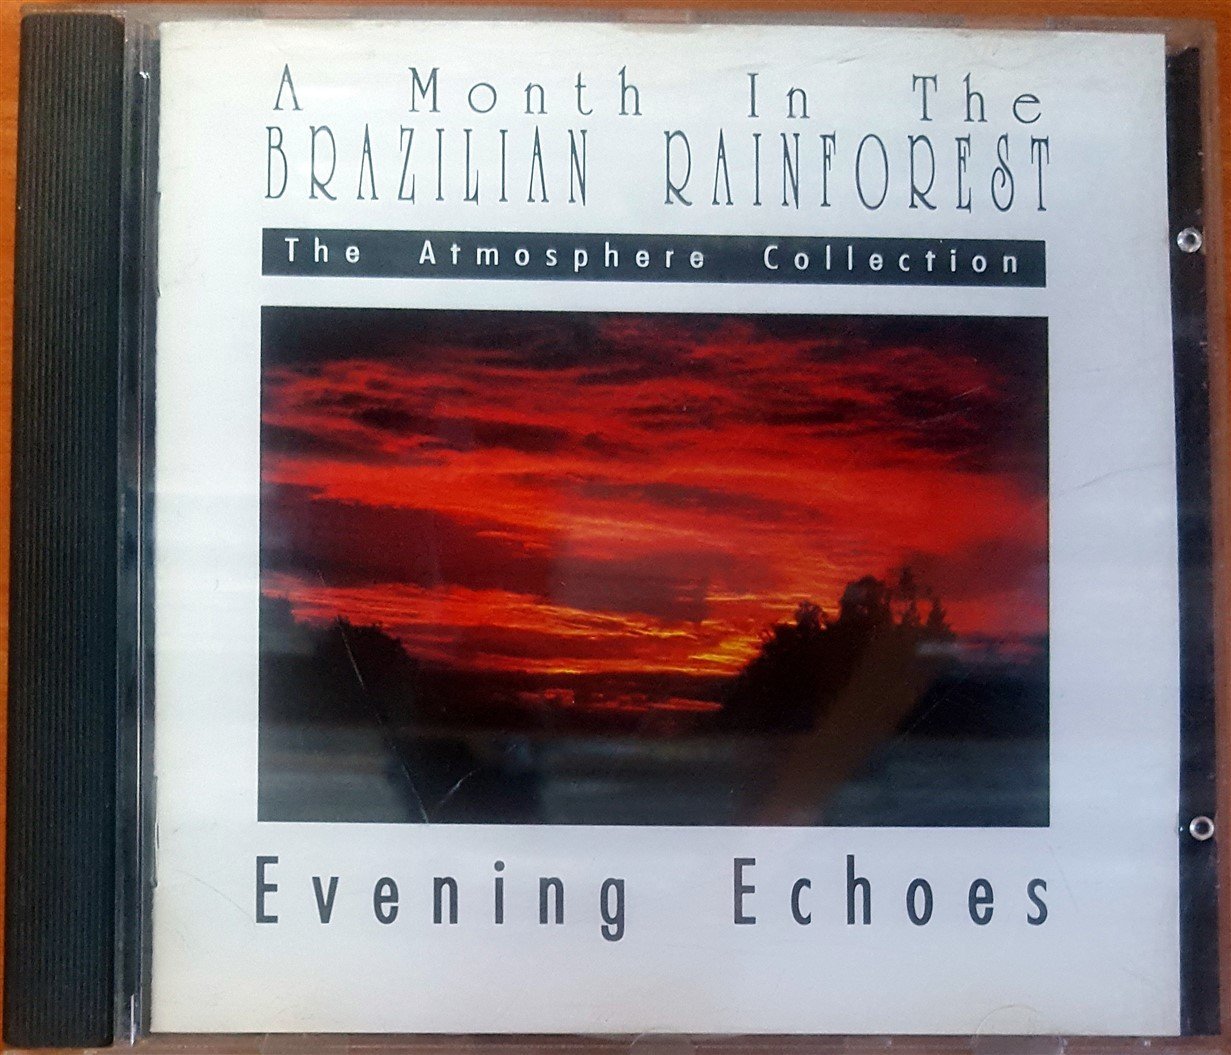 A MONTH IN THE BRAZILIAN RAINFOREST / EVENING ECHOES / THE ATMOSPHERE COLLECTION (1990) FIELD RECORDING, NON MUSIC / RYKODISC CD 2.EL